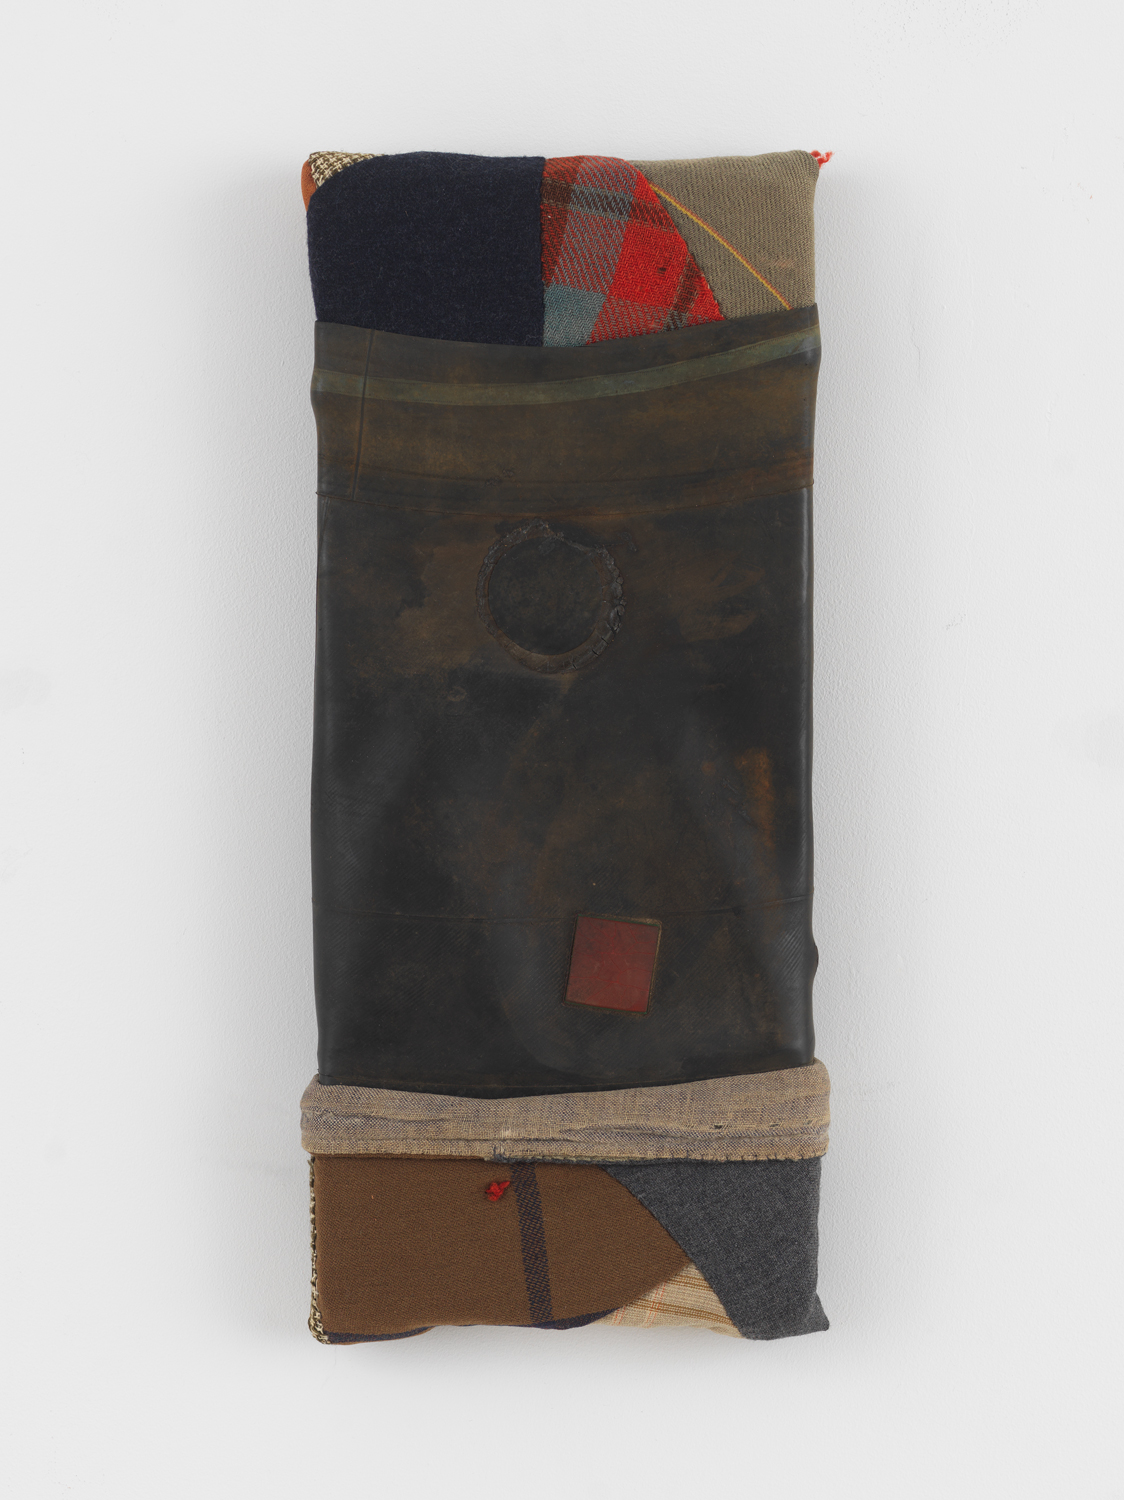 Dan Dowd, Found patched truck tire innertube rubber, found quilt fragments on found board, 2012, 14 x 6 x 2 in.